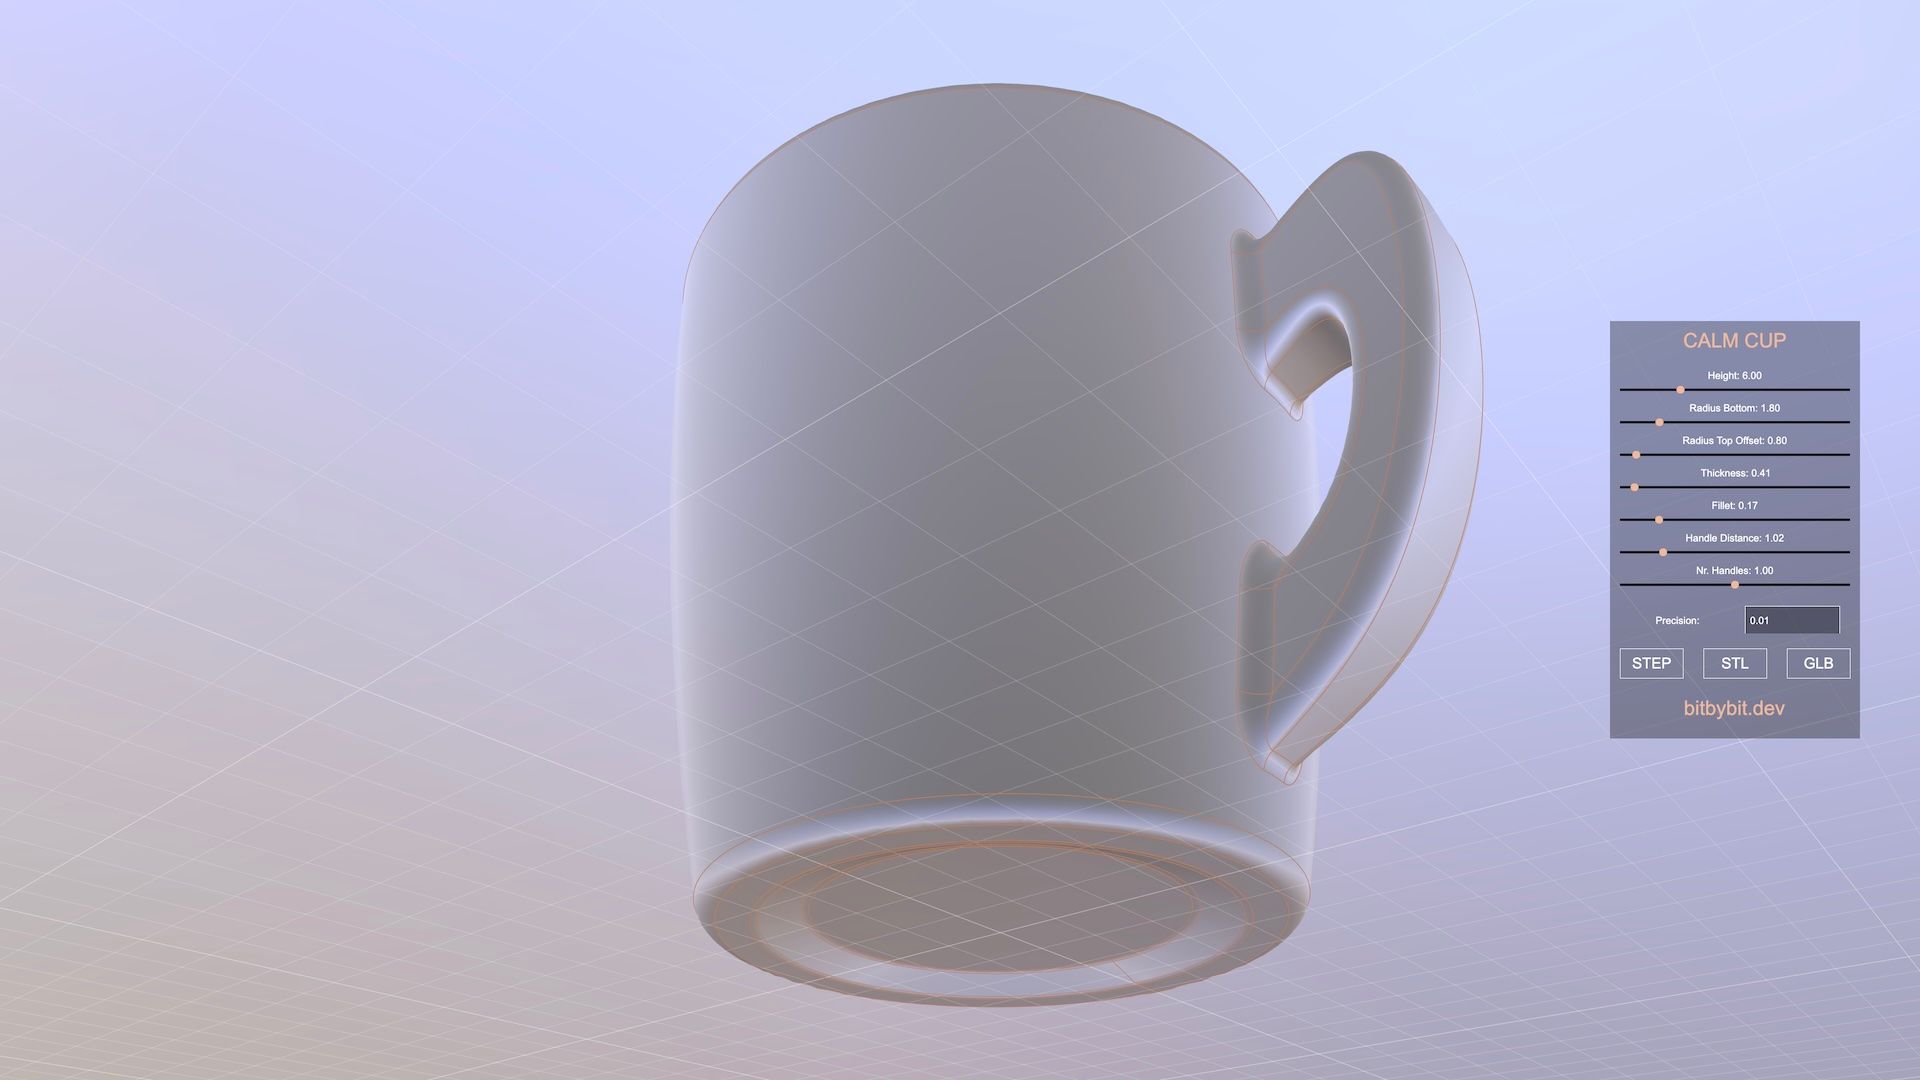 calm cup 3D model shown from bottom upwards